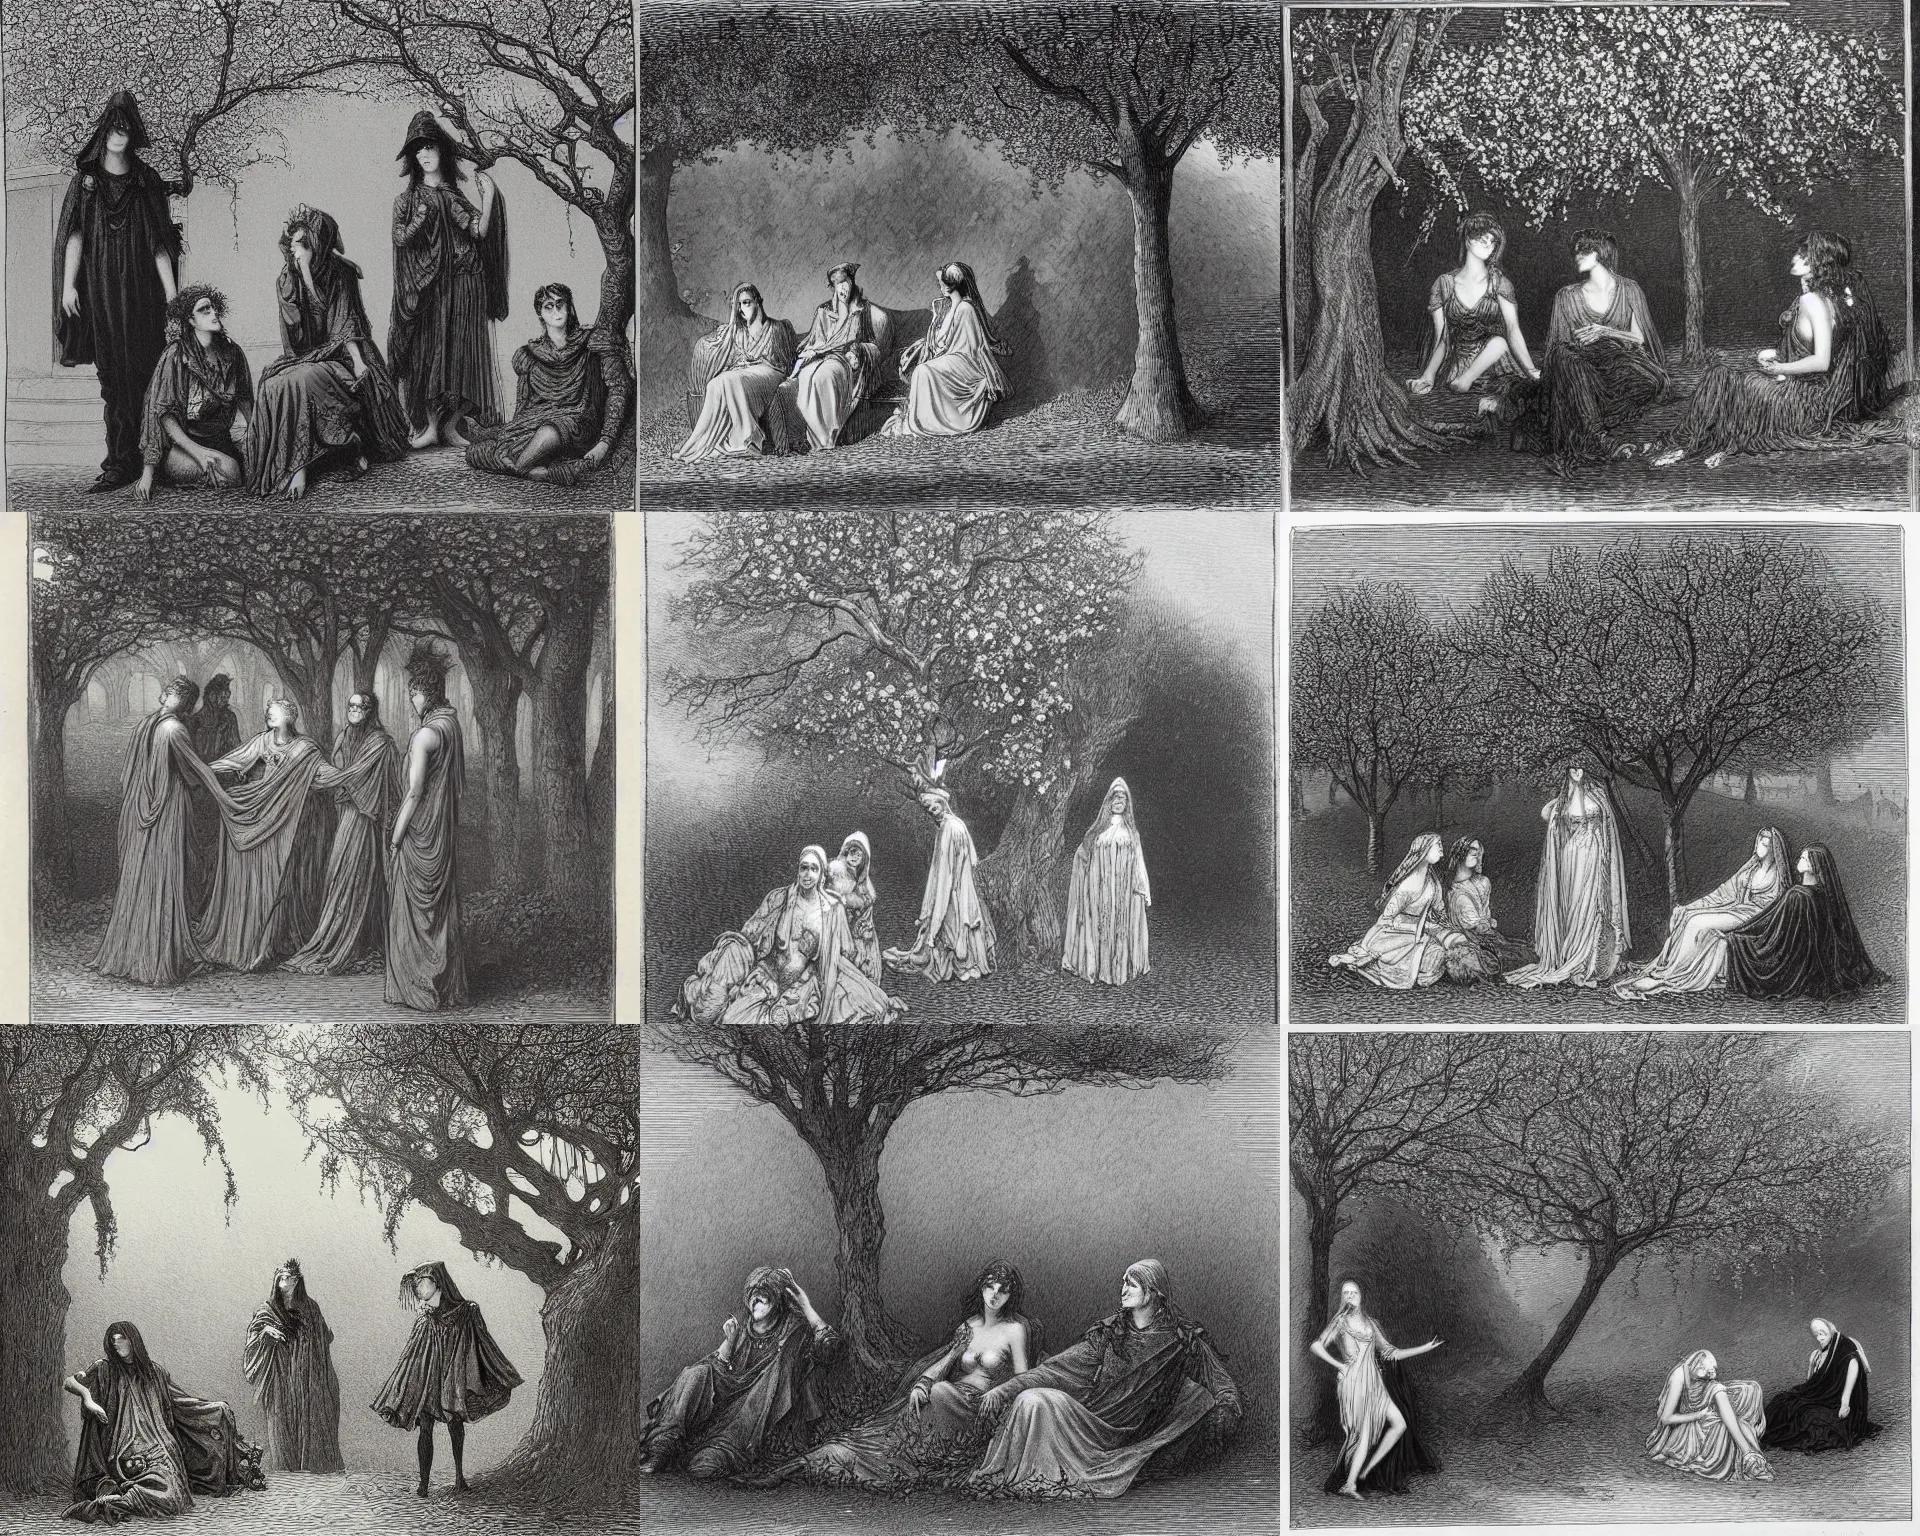 Prompt: hd art by gustave dore. three goths loitering in the shade, talking beneath a cherry tree outside a blockbuster video store.